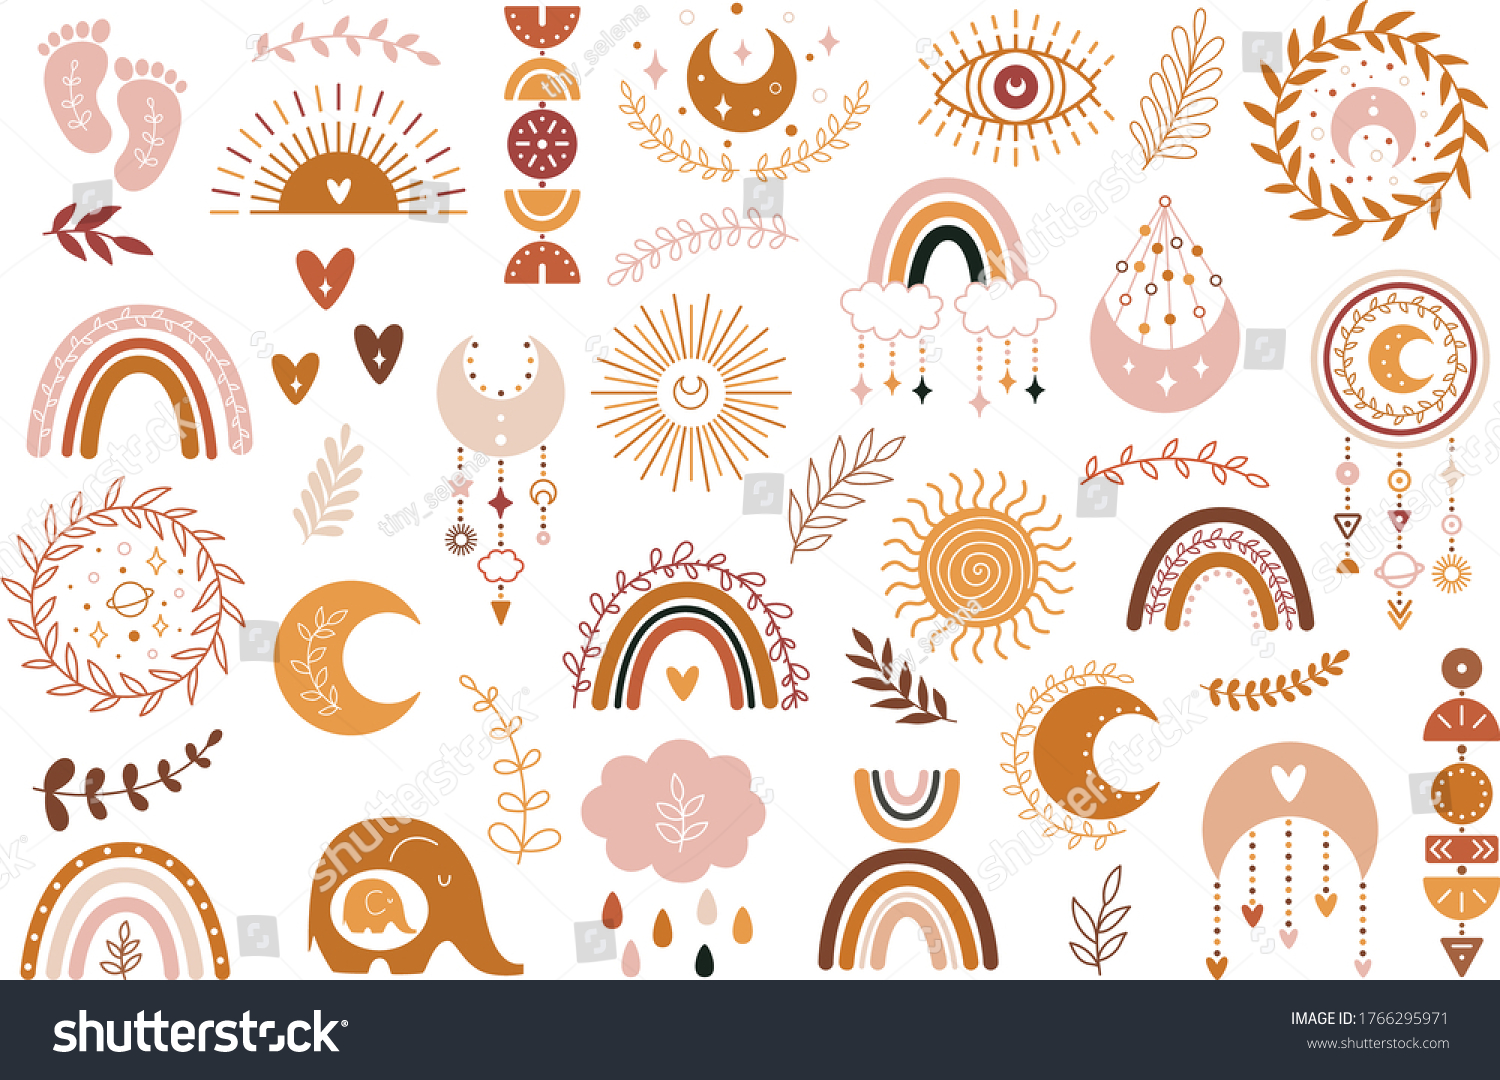 Vector hand drawn boho clipart for nursery decoration with cute rainbows and moon, sun, cloud, dream catcher. Doodle modern illustration. Perfect for baby shower, birthday, children's party #1766295971